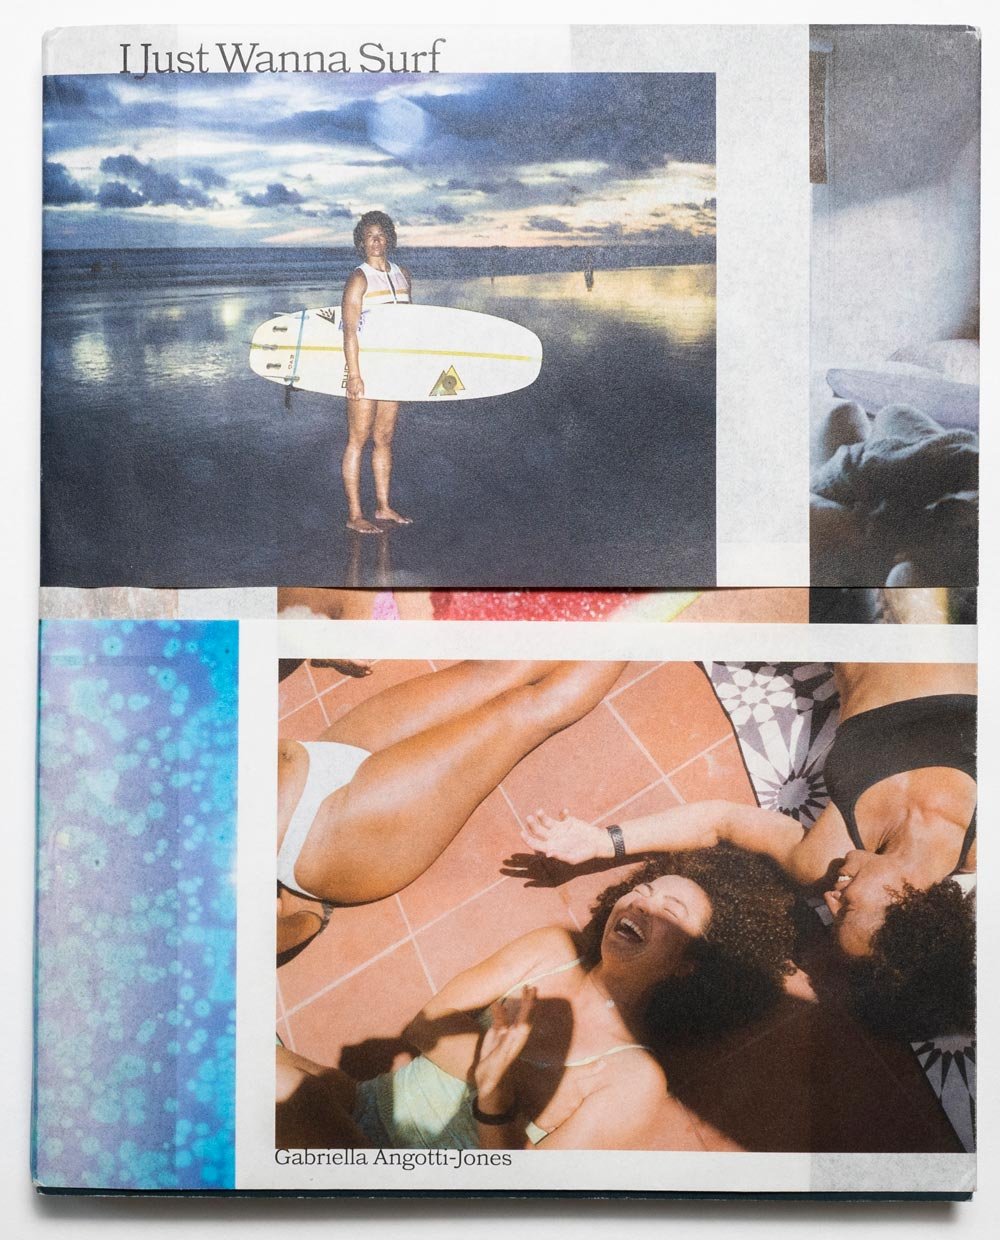 Image of the cover of "I Just Wanna Surf". A book by Gabriella Angotti-Jones